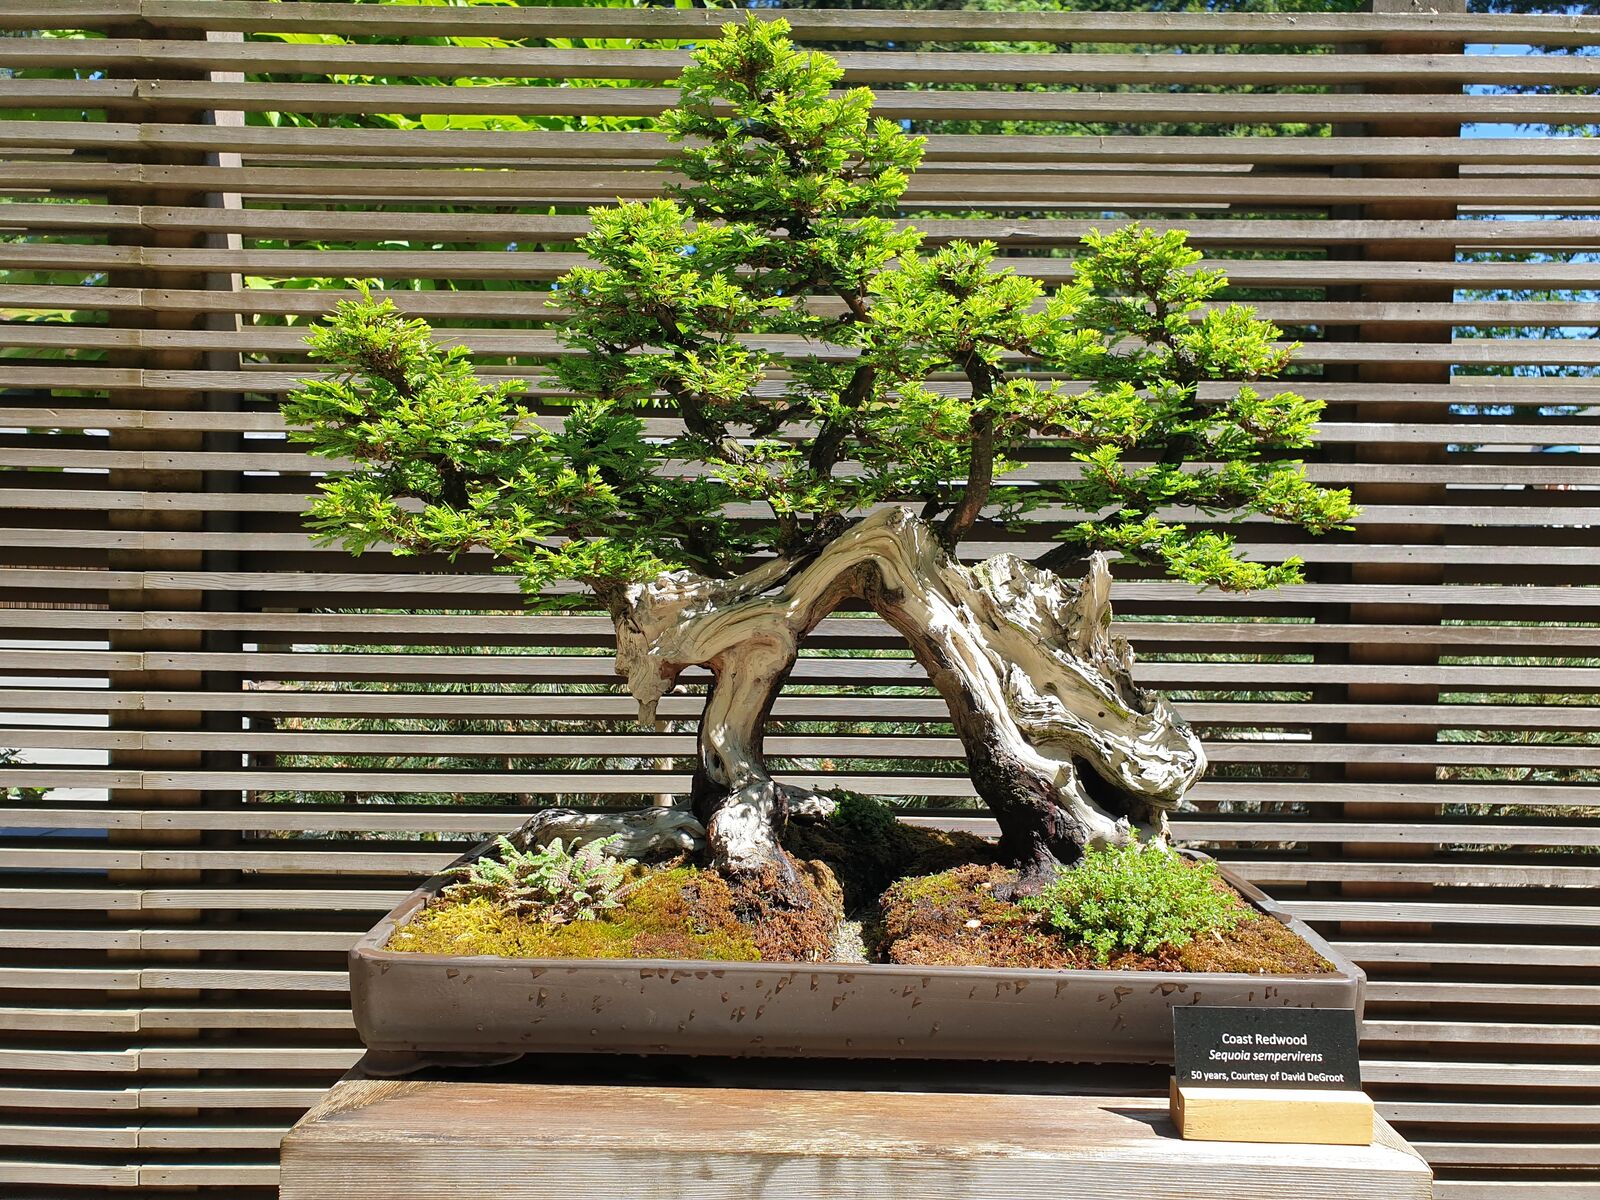 There were bonsai trees, some of which were hundreds of years old.